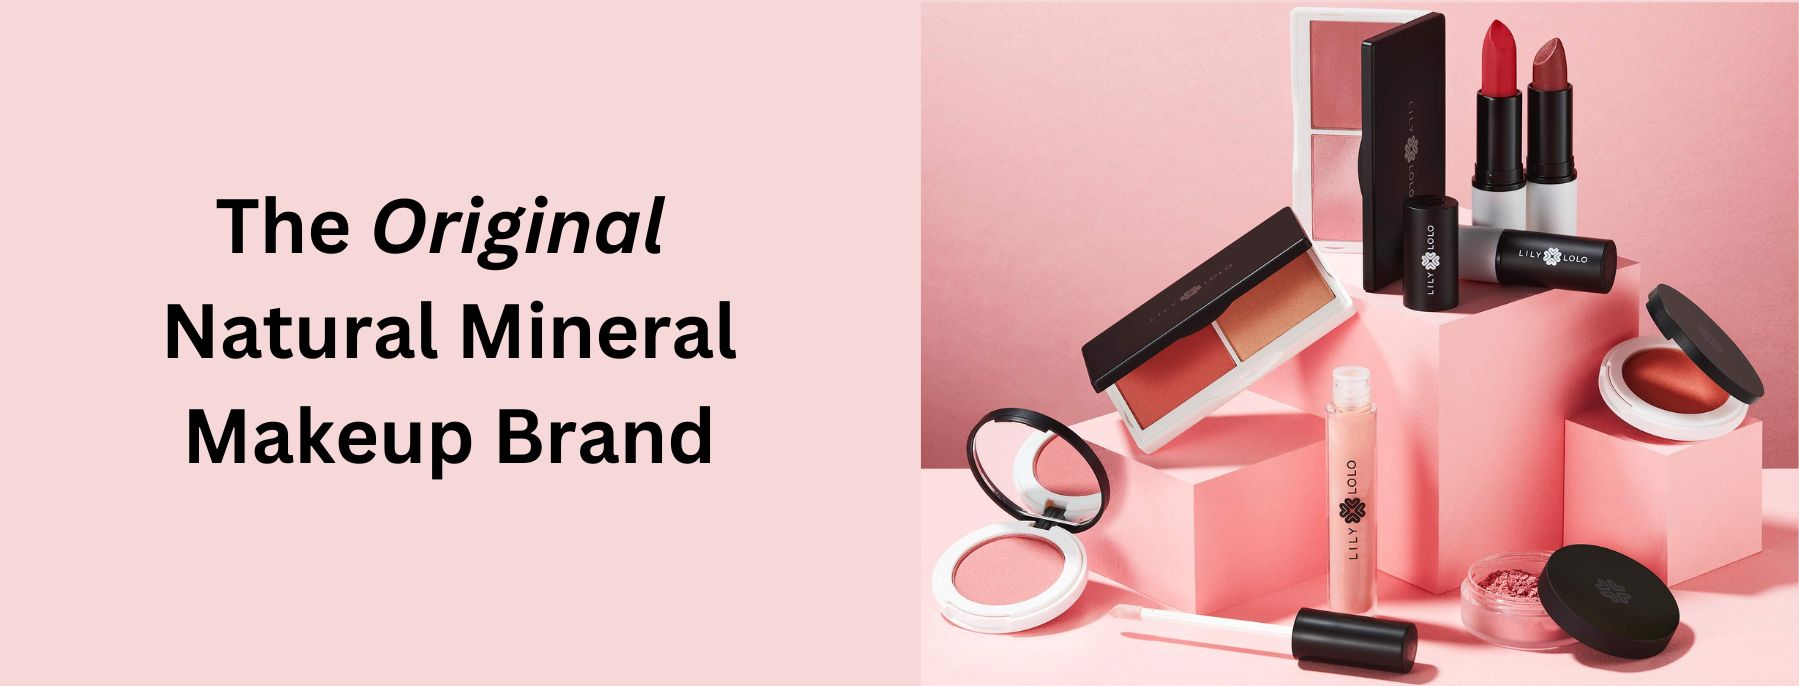 LilyLolo is The Original Natural Mineral Makeup Brand